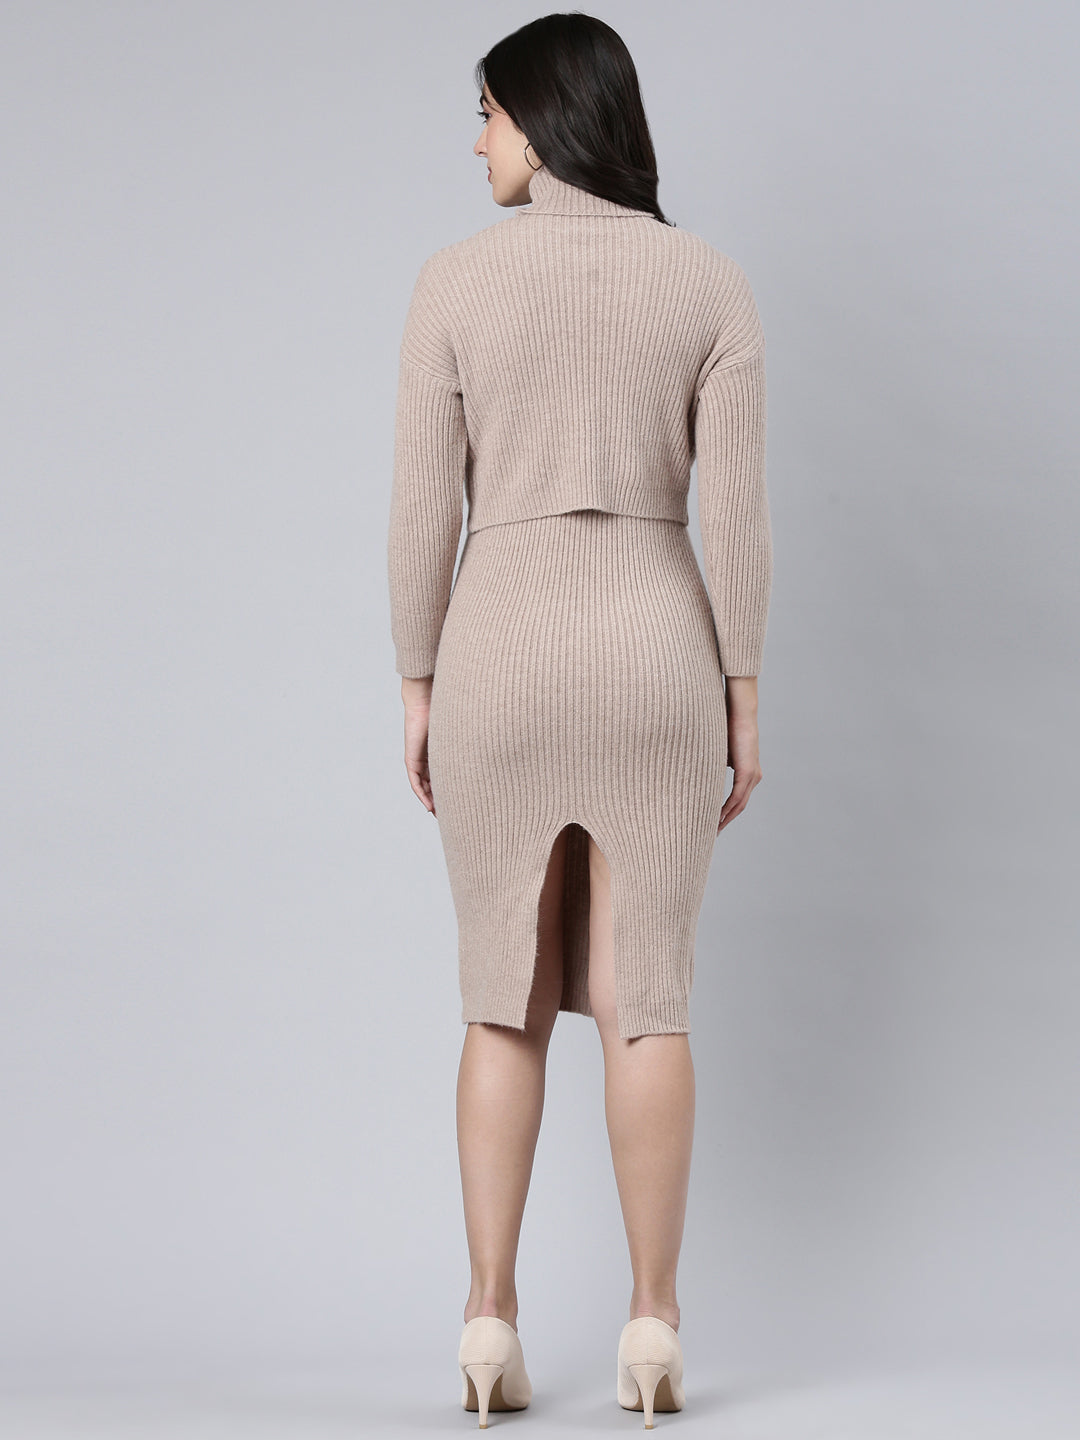 Women Self Design Beige Bodycon Dress Comes with Top